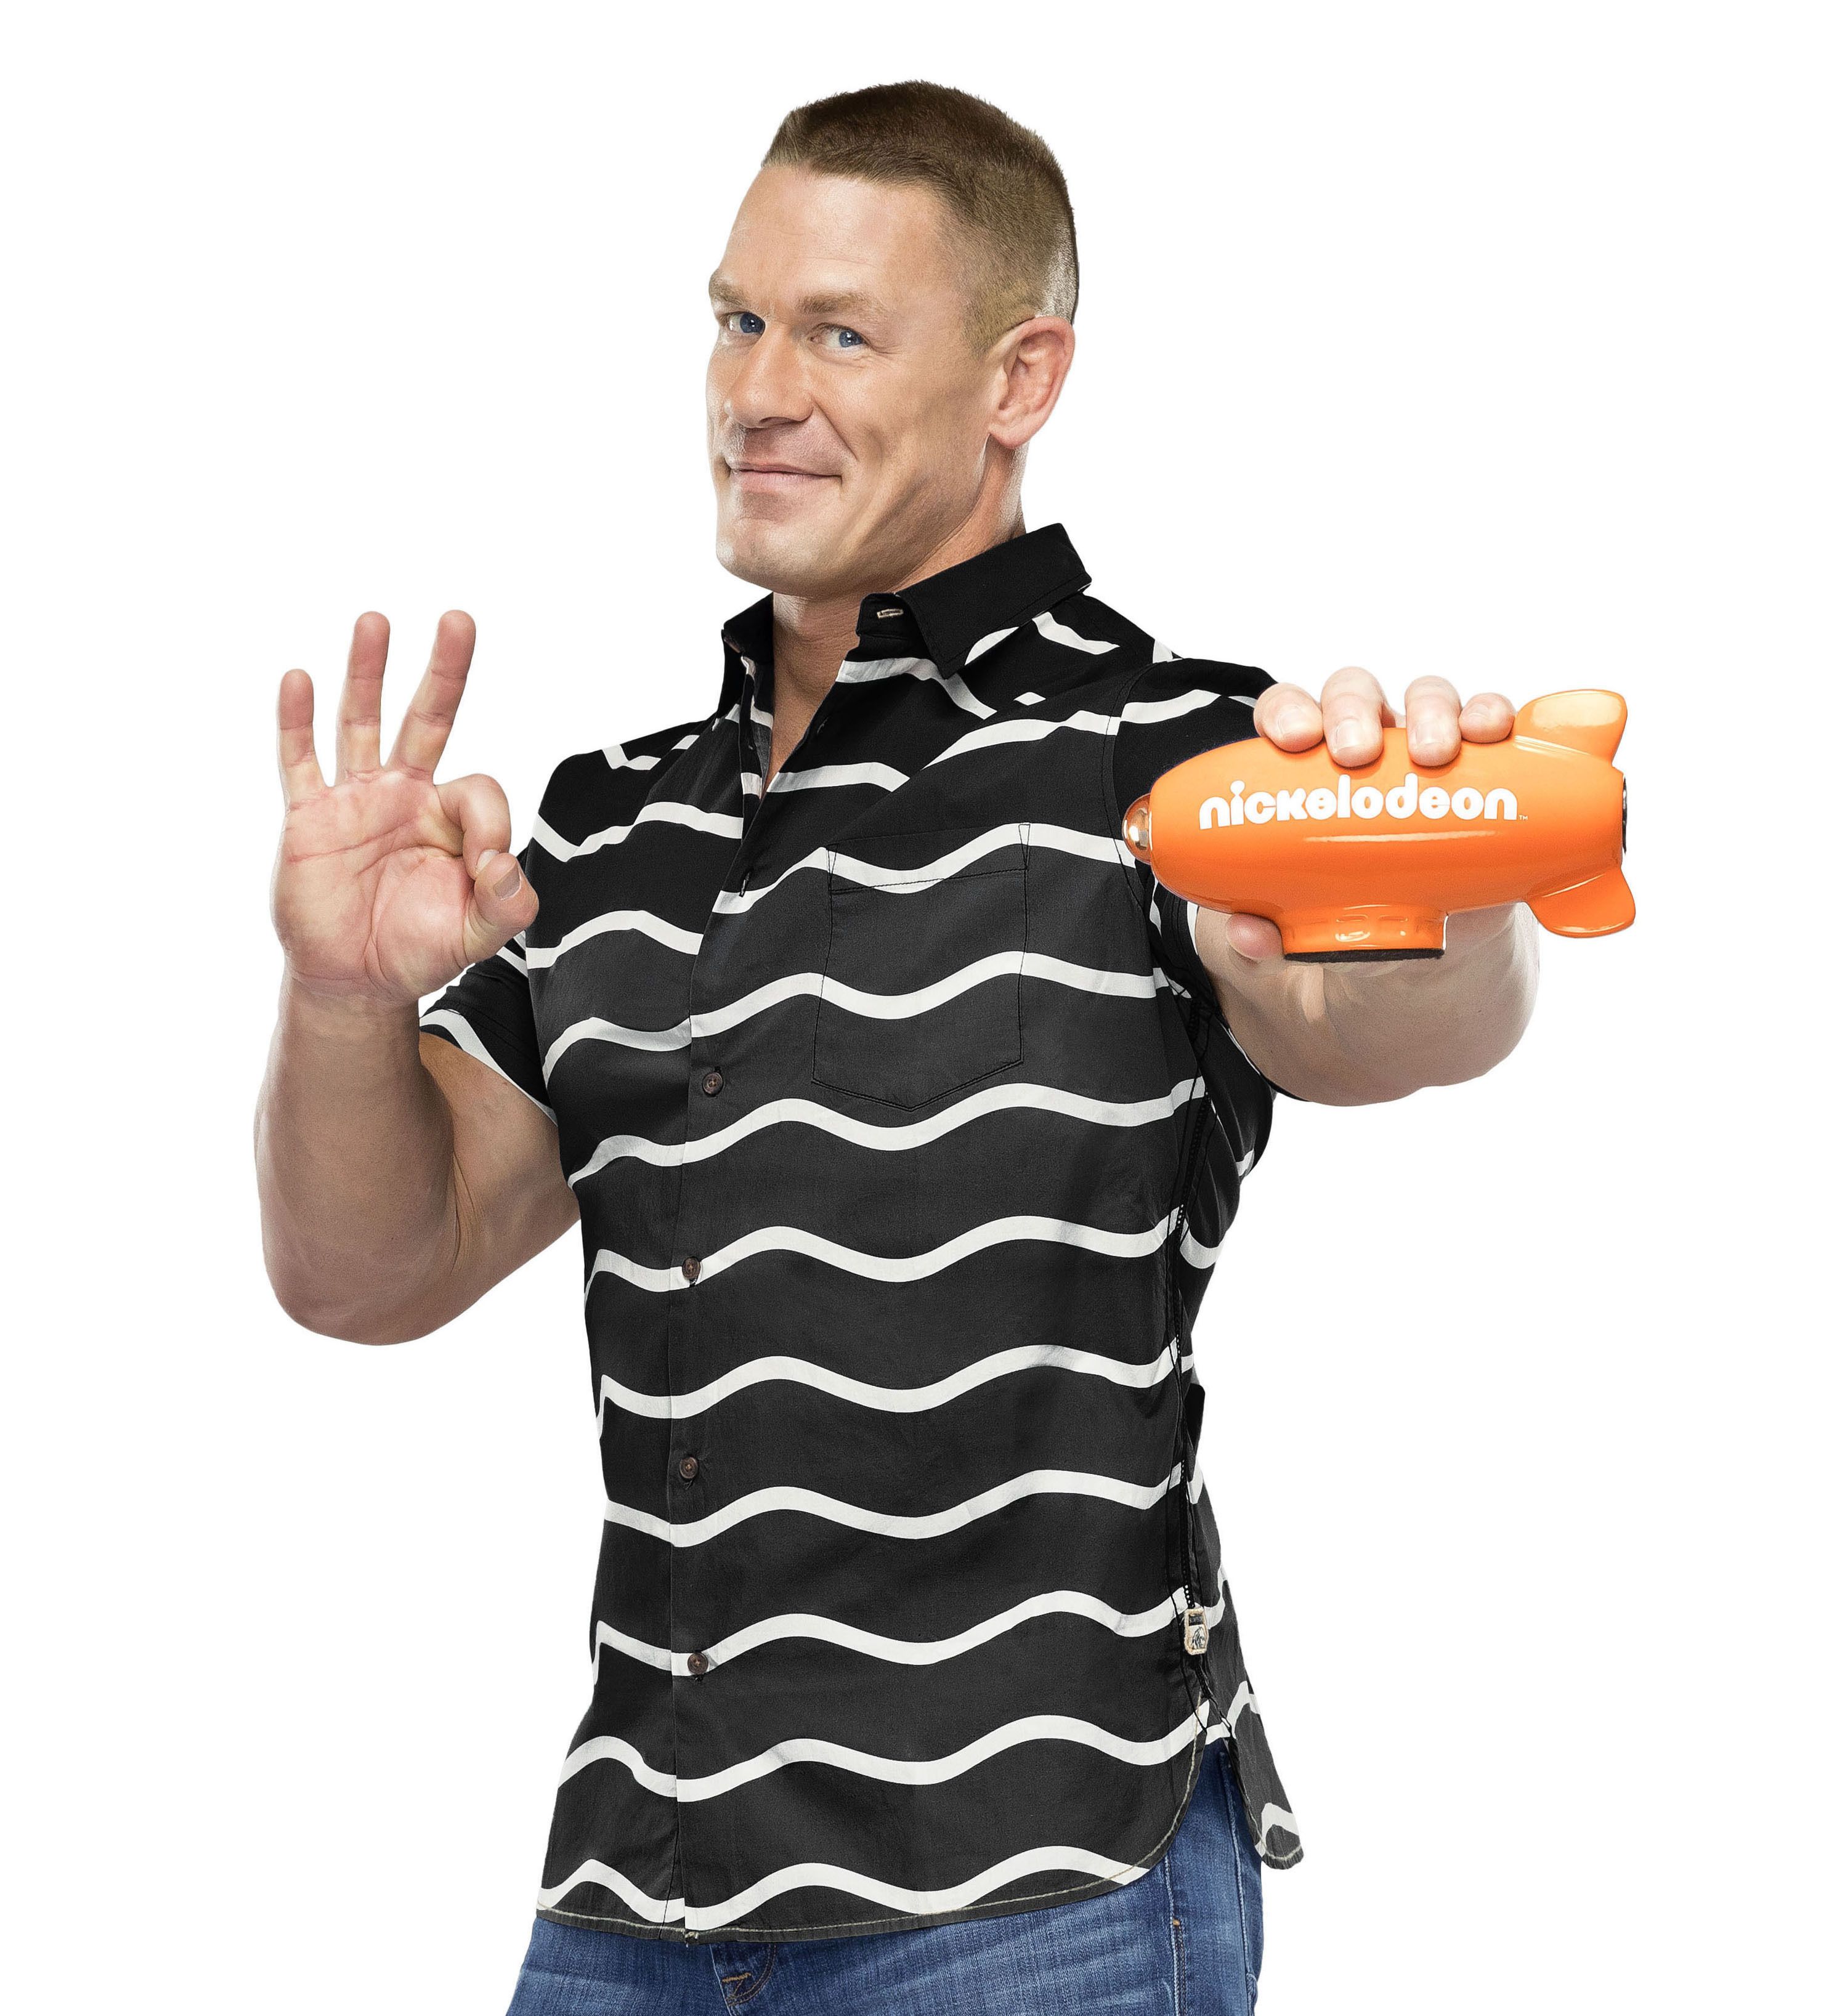 Nickelodeon and WWE Superstar John Cena Prep Three Projects for Including Host of the 2018 Kids' Choice Awards